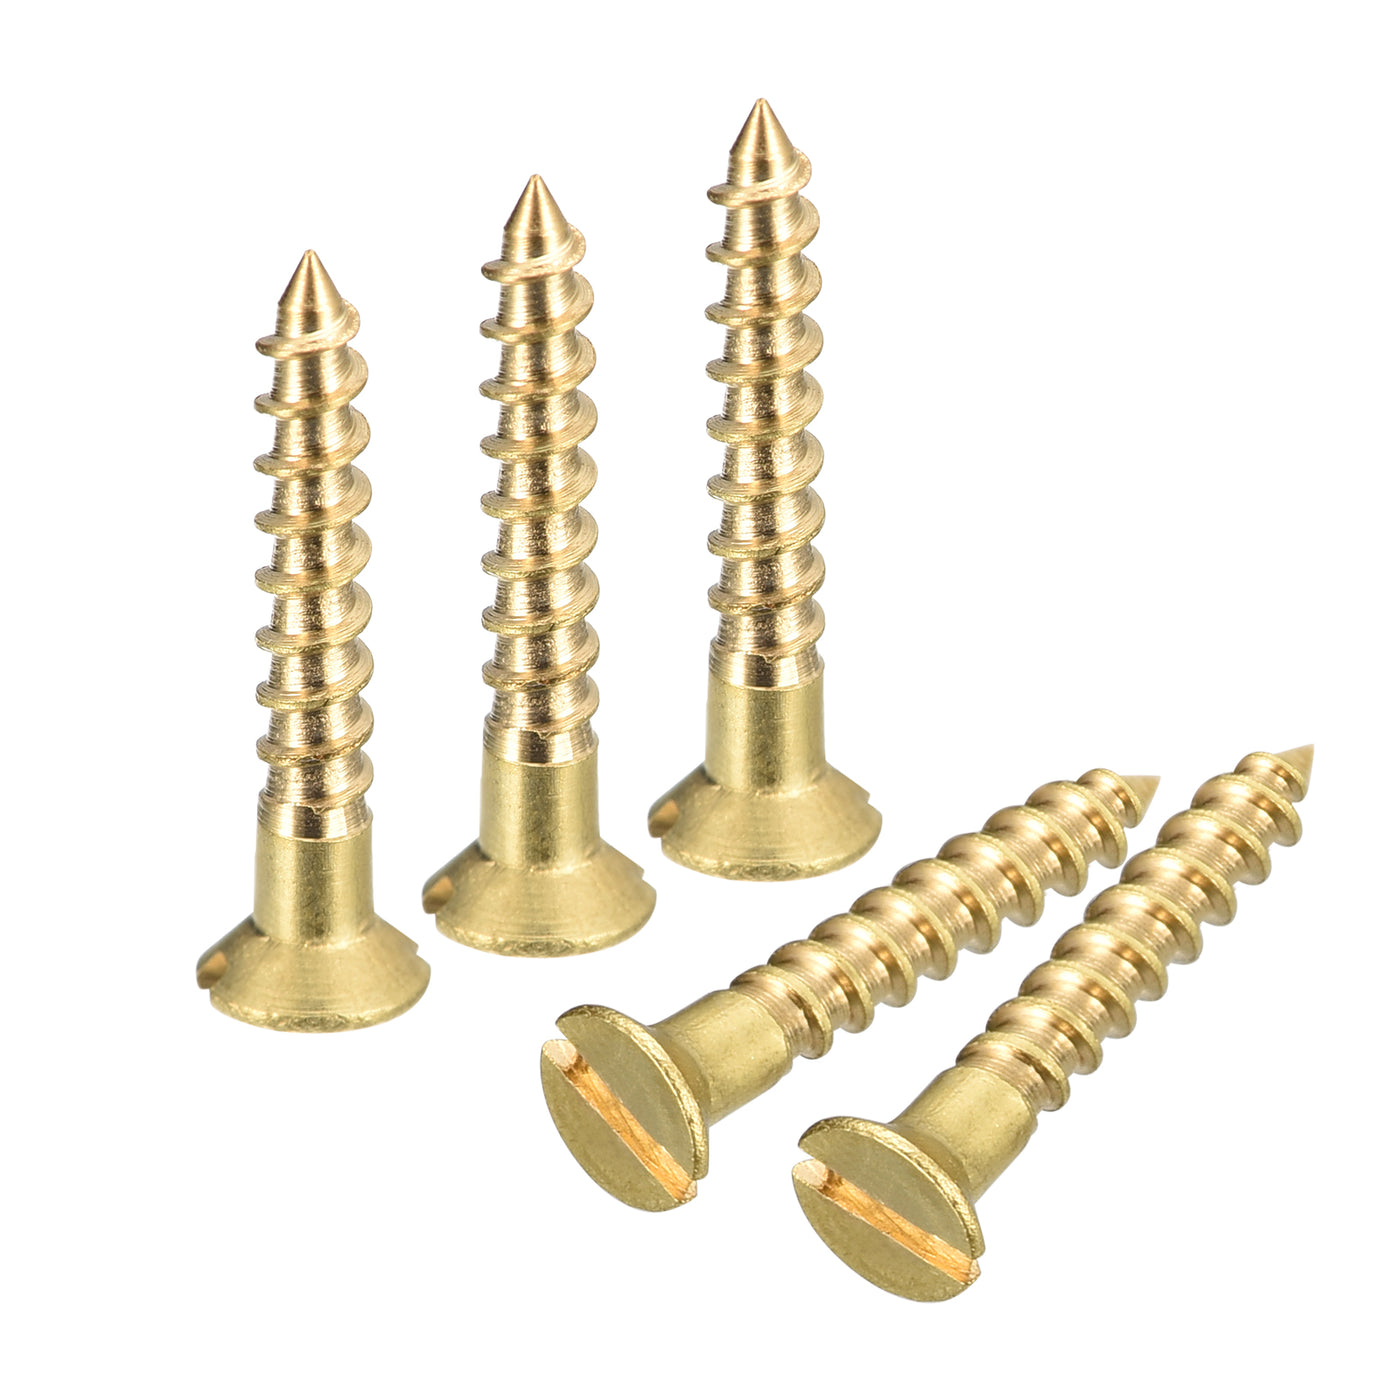 uxcell Uxcell 50Pcs M2.5 x 16mm Brass Slotted Drive Flat Head Wood Screws Self Tapping Screw